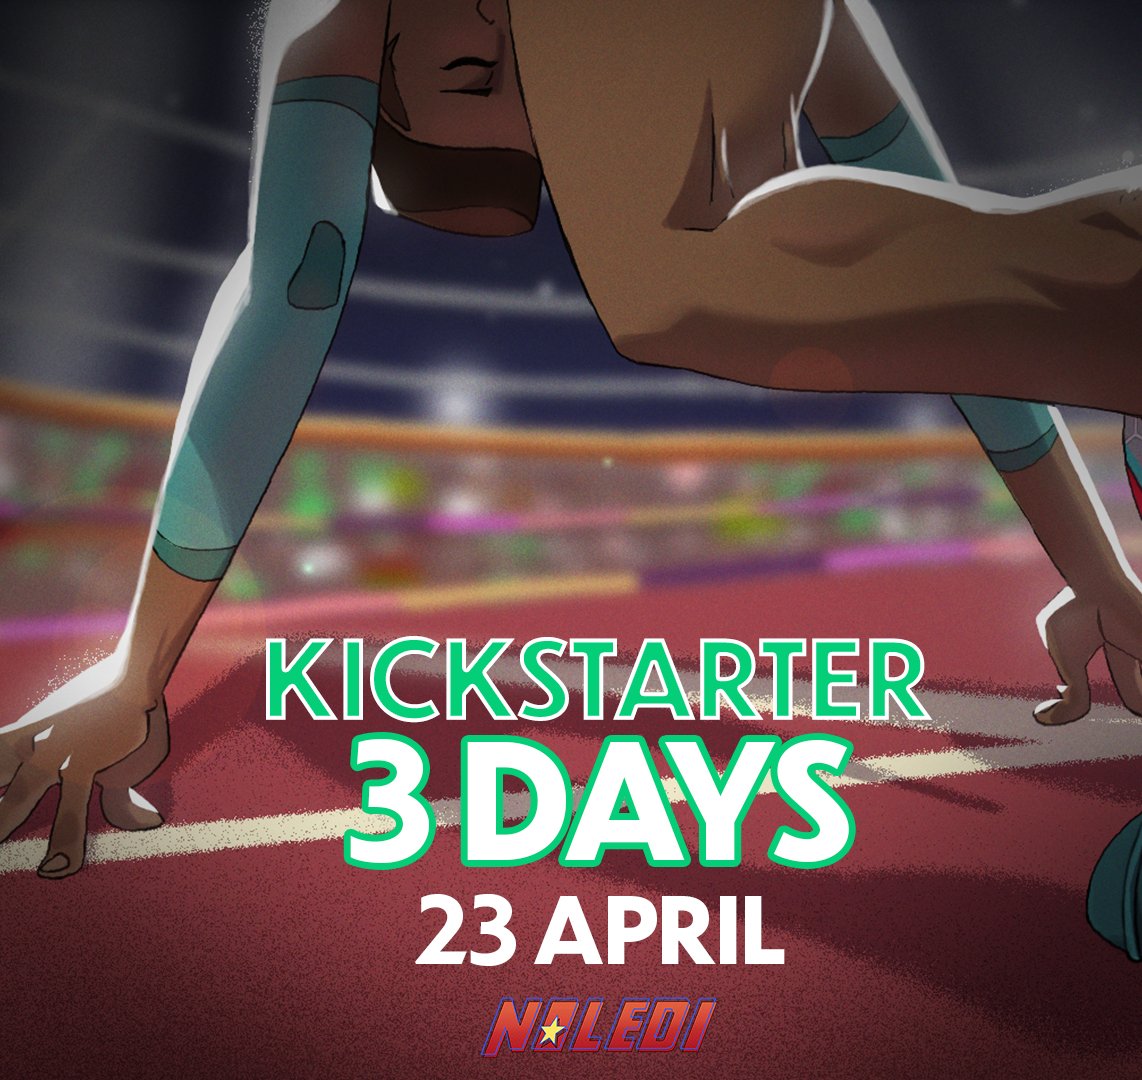 OUR KICKSTARTER LAUNCHES IN 3 DAYS!! We are soooo excited!!!!!! Sign up to our mailing list to be notified the moment we launch!!! naledimovie.com